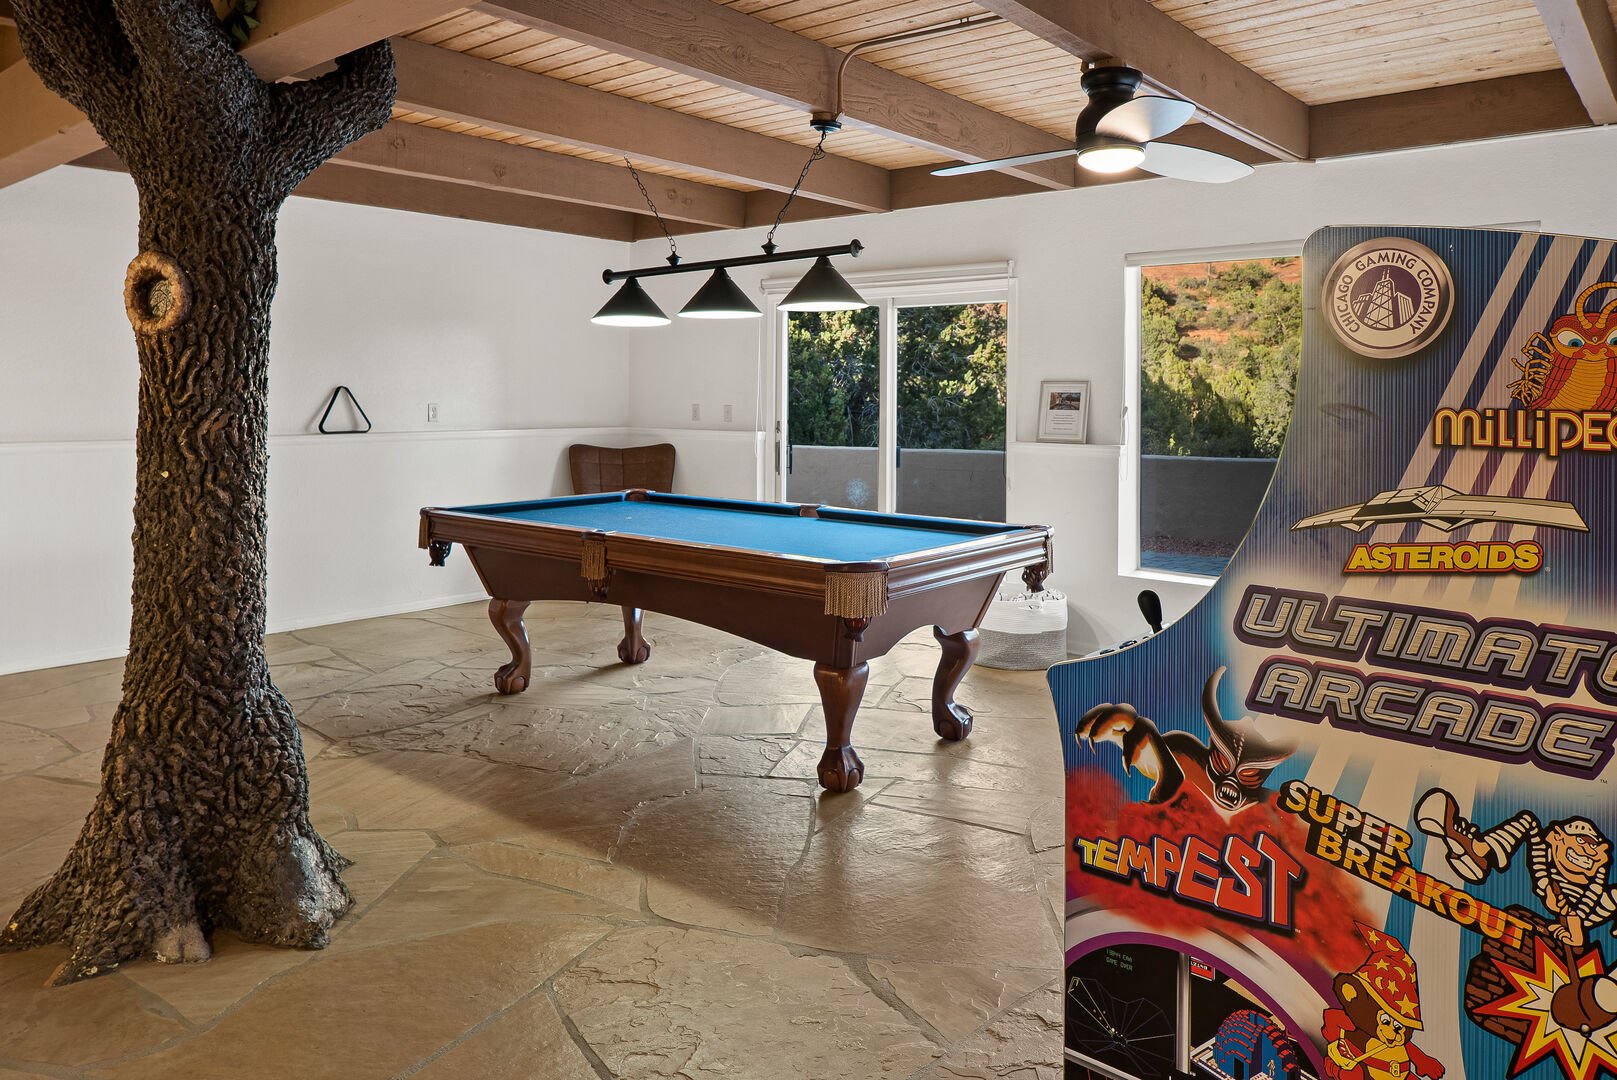 Pool Table & Arcade Game In Basement Area